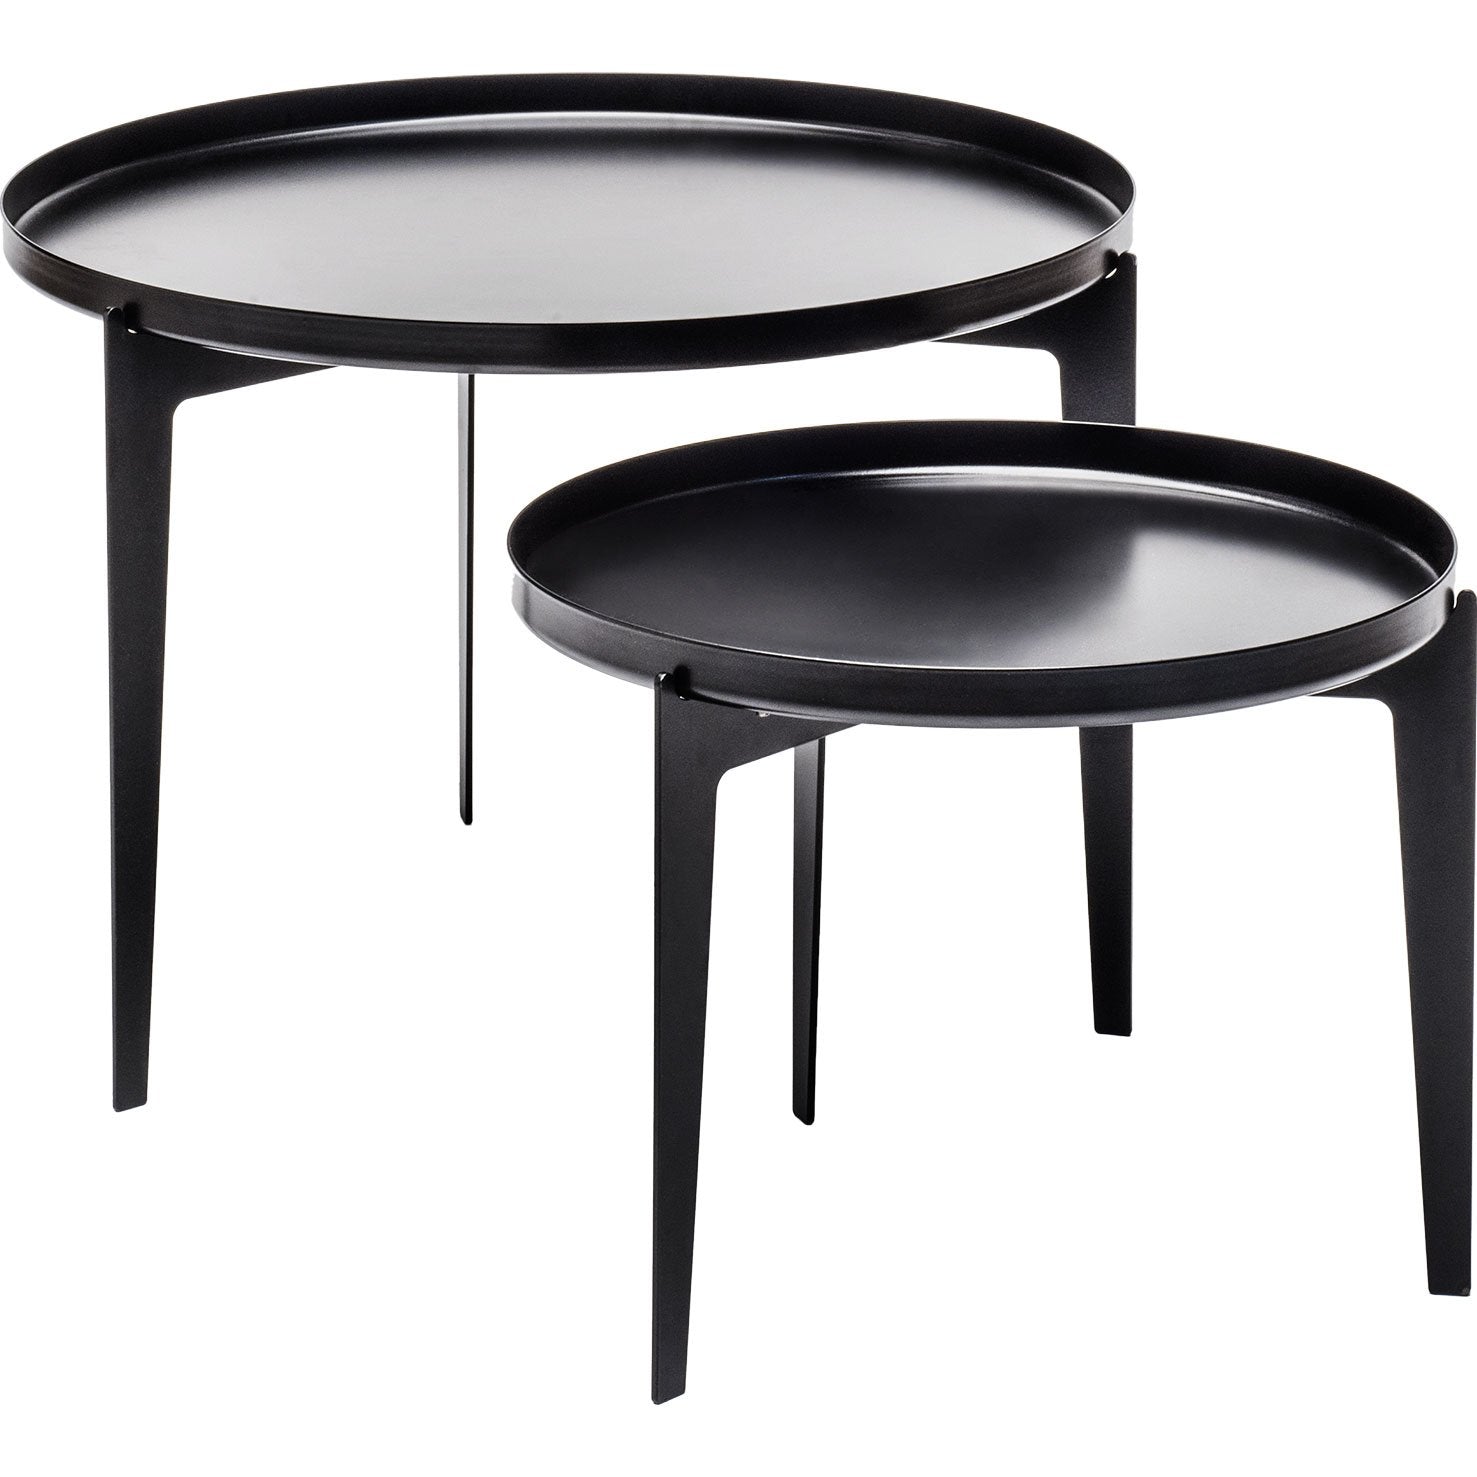 ILLUSION side tables